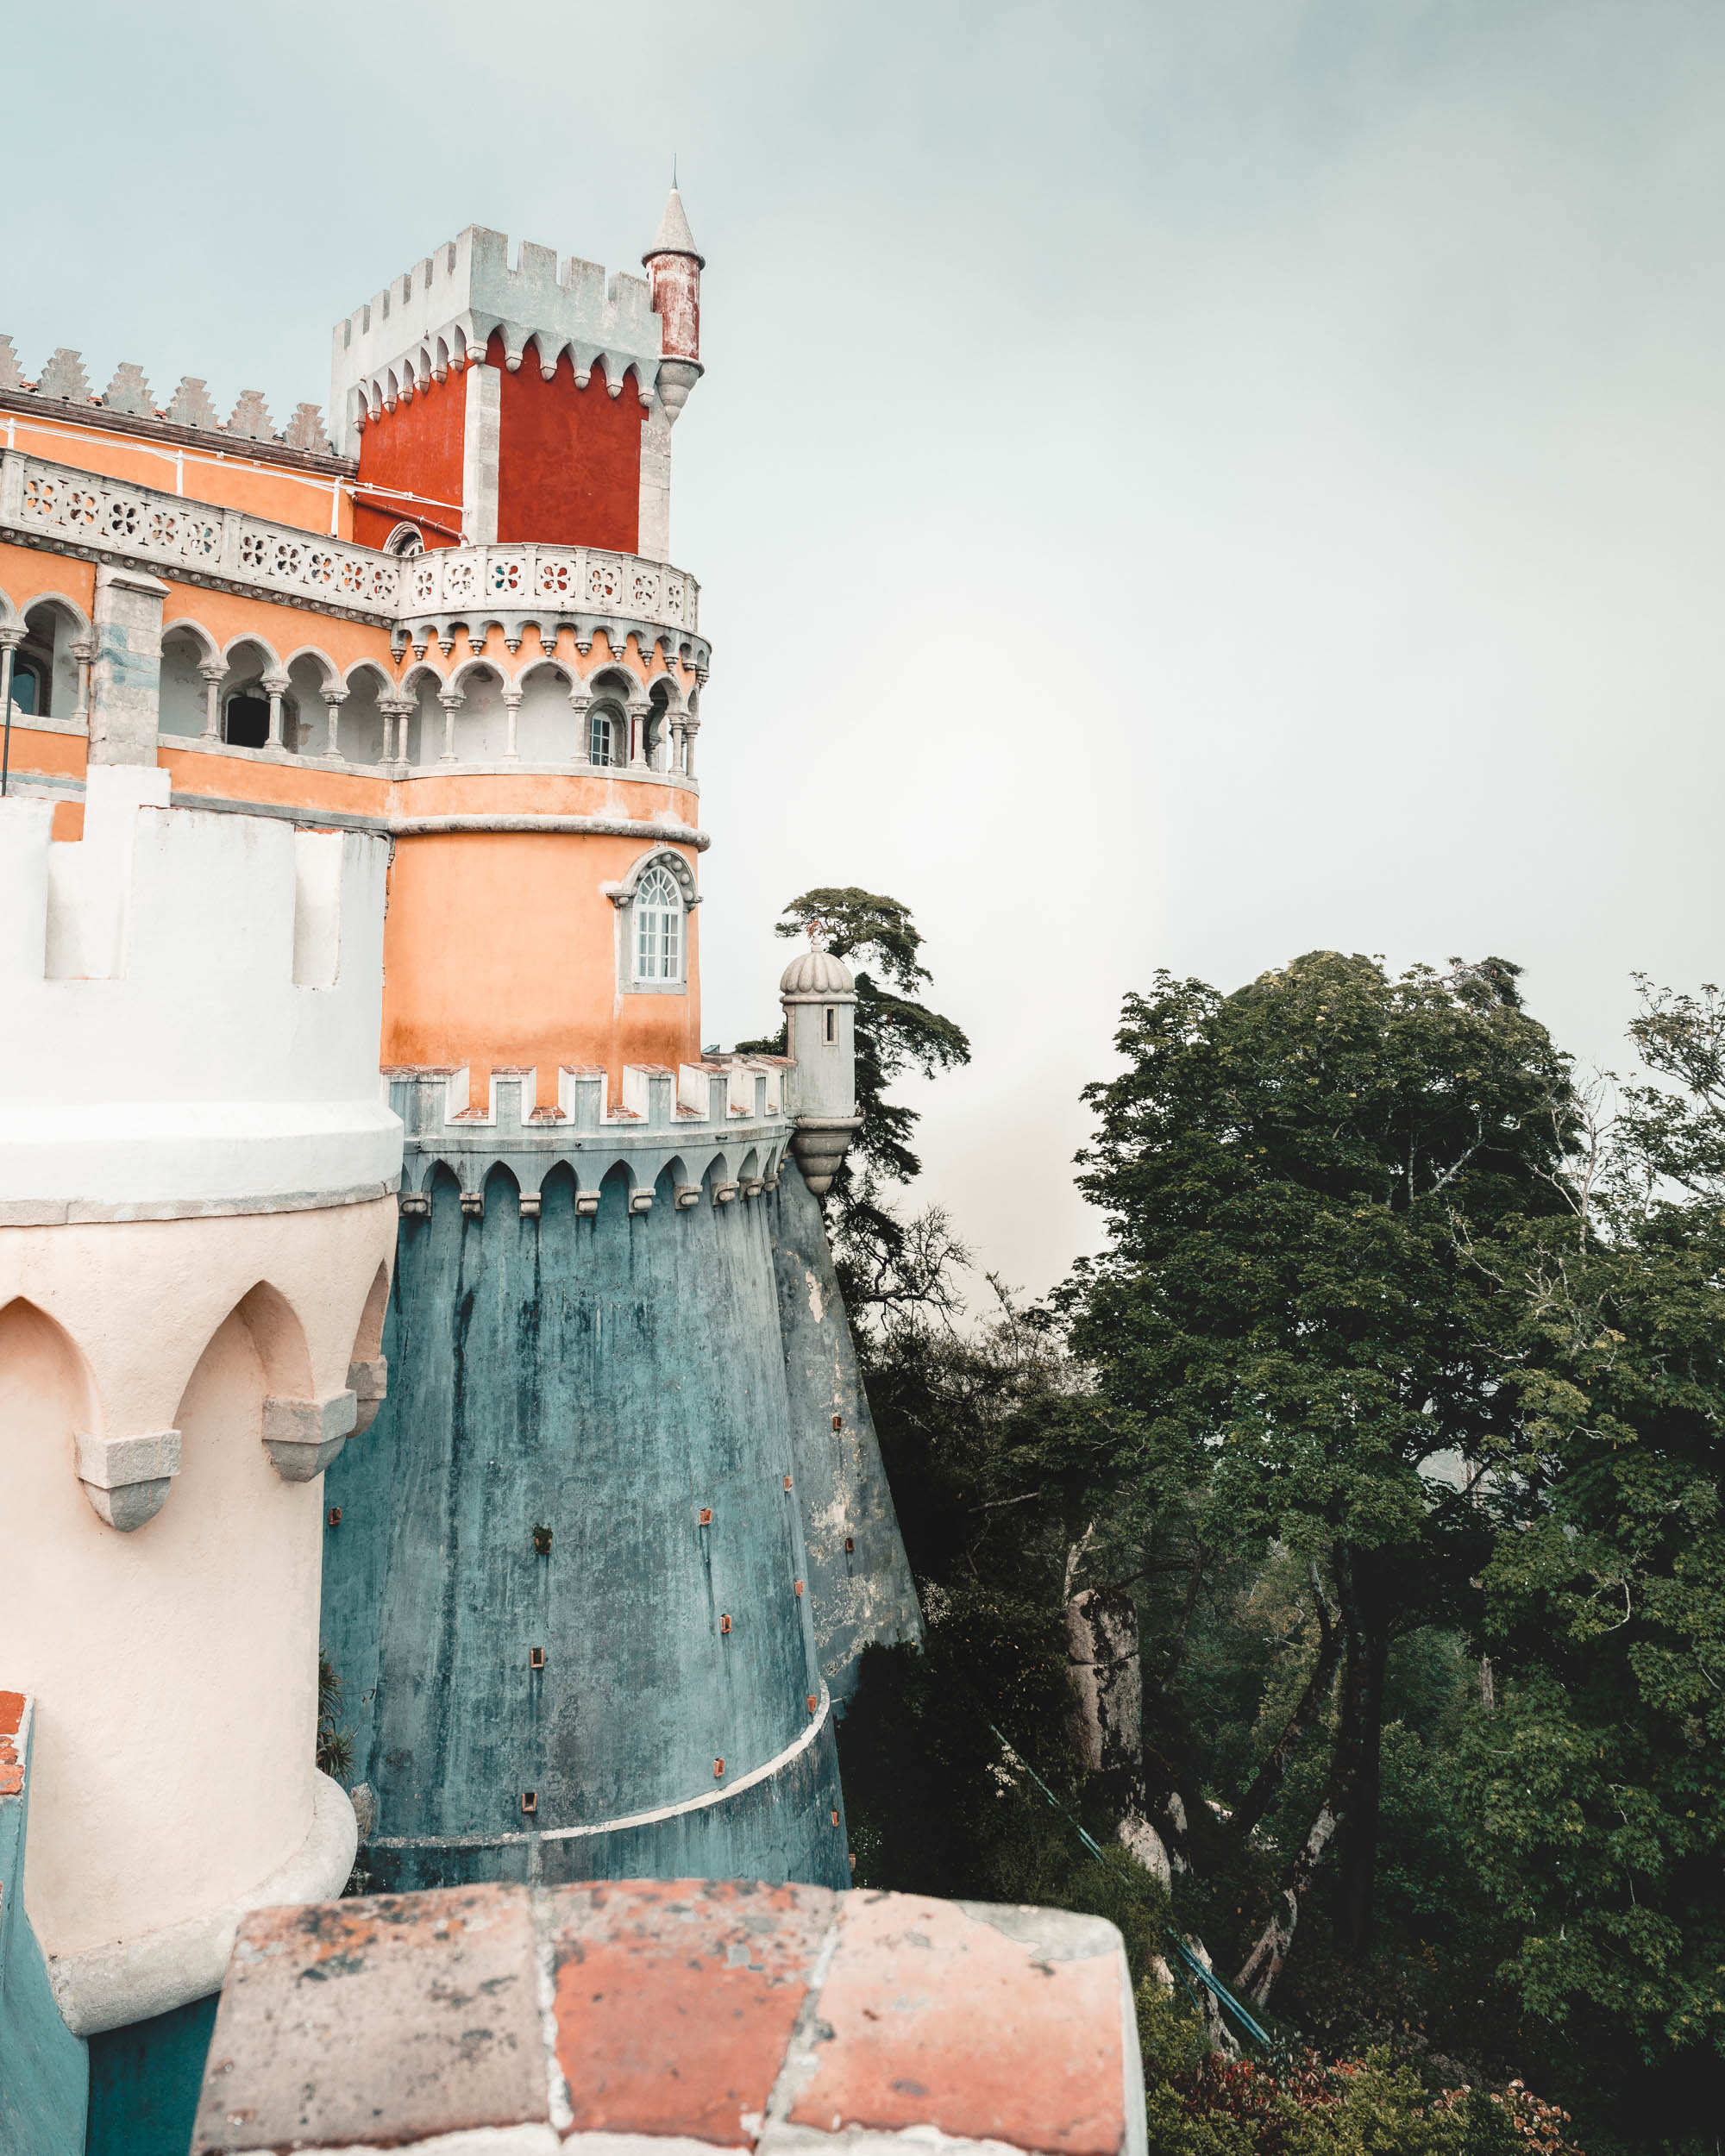 Pena palace, the colorful castle a day trip away from Lisbon in Sintra, Portugal